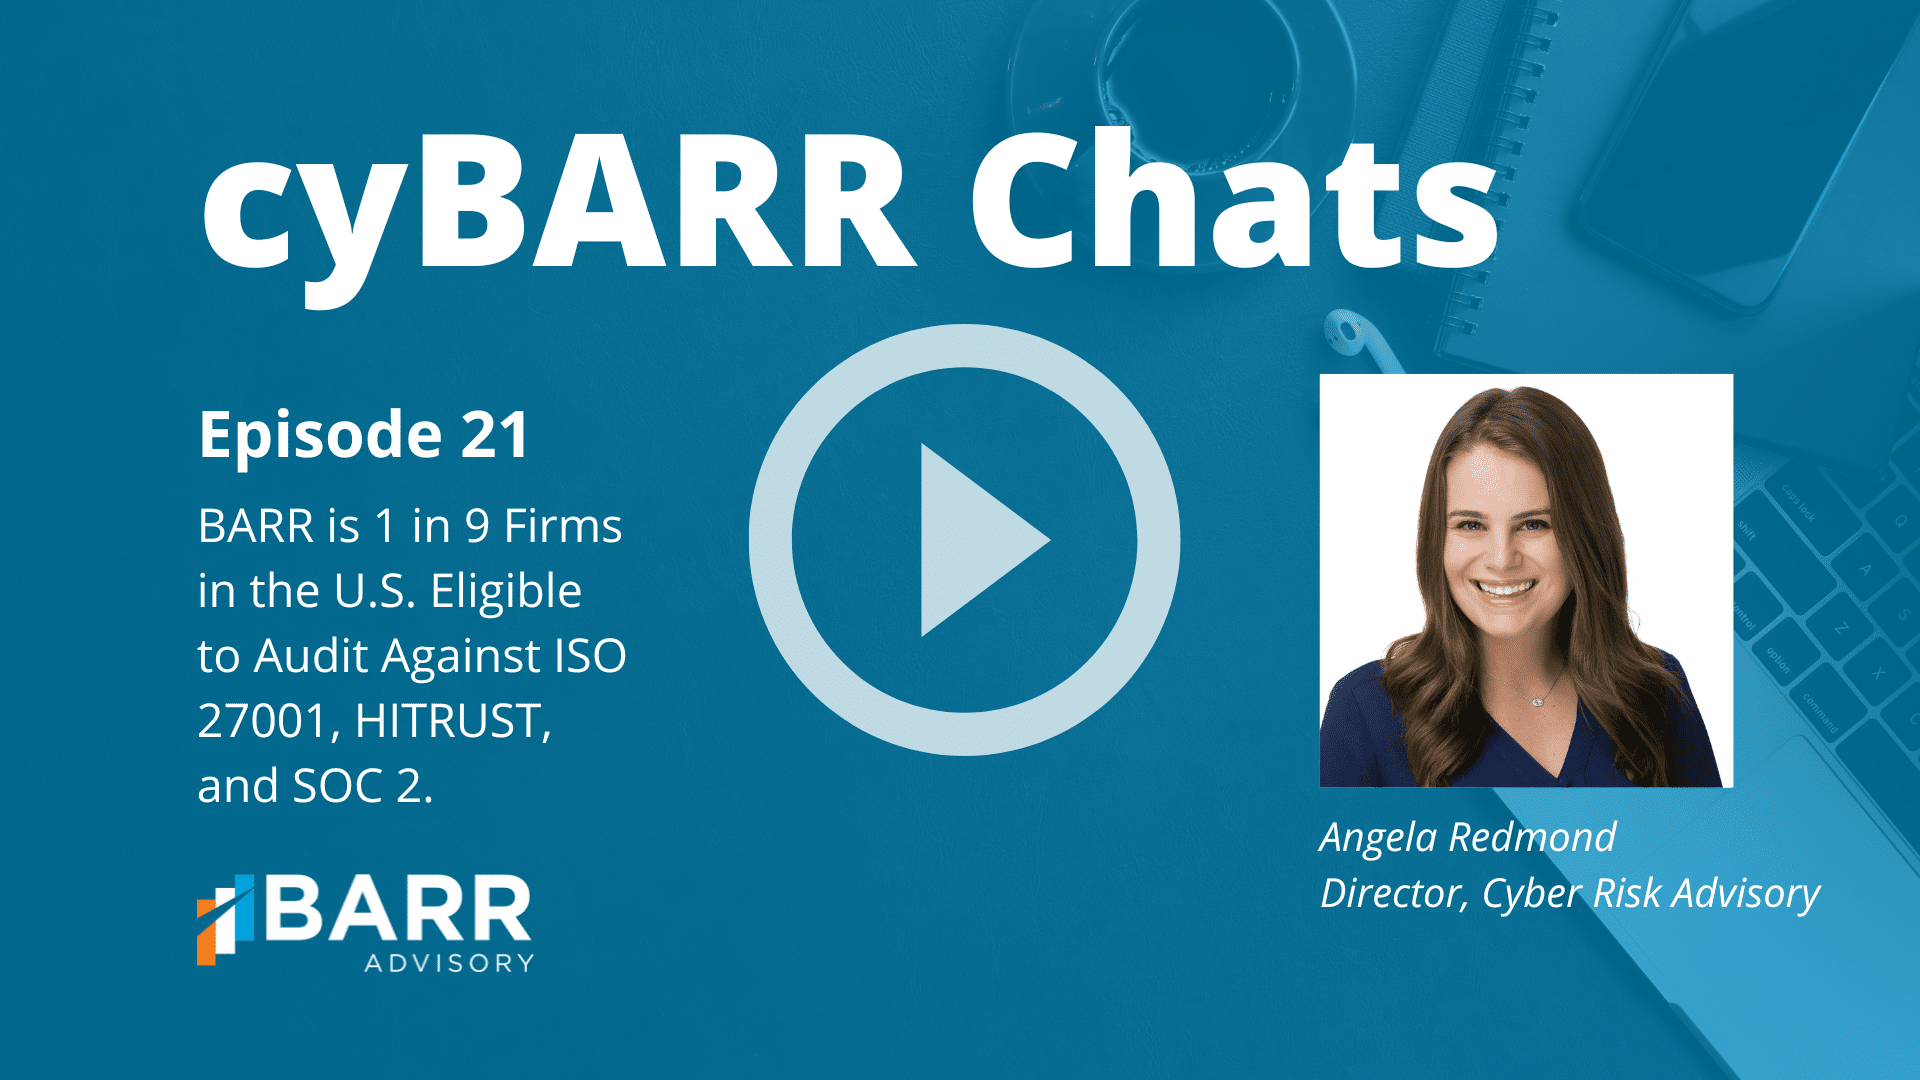 cyBARR Chats Edition 21: BARR is 1 in 9 Firms in the U.S. Eligible to Audit Against ISO 27001, HITRUST, and SOC 2